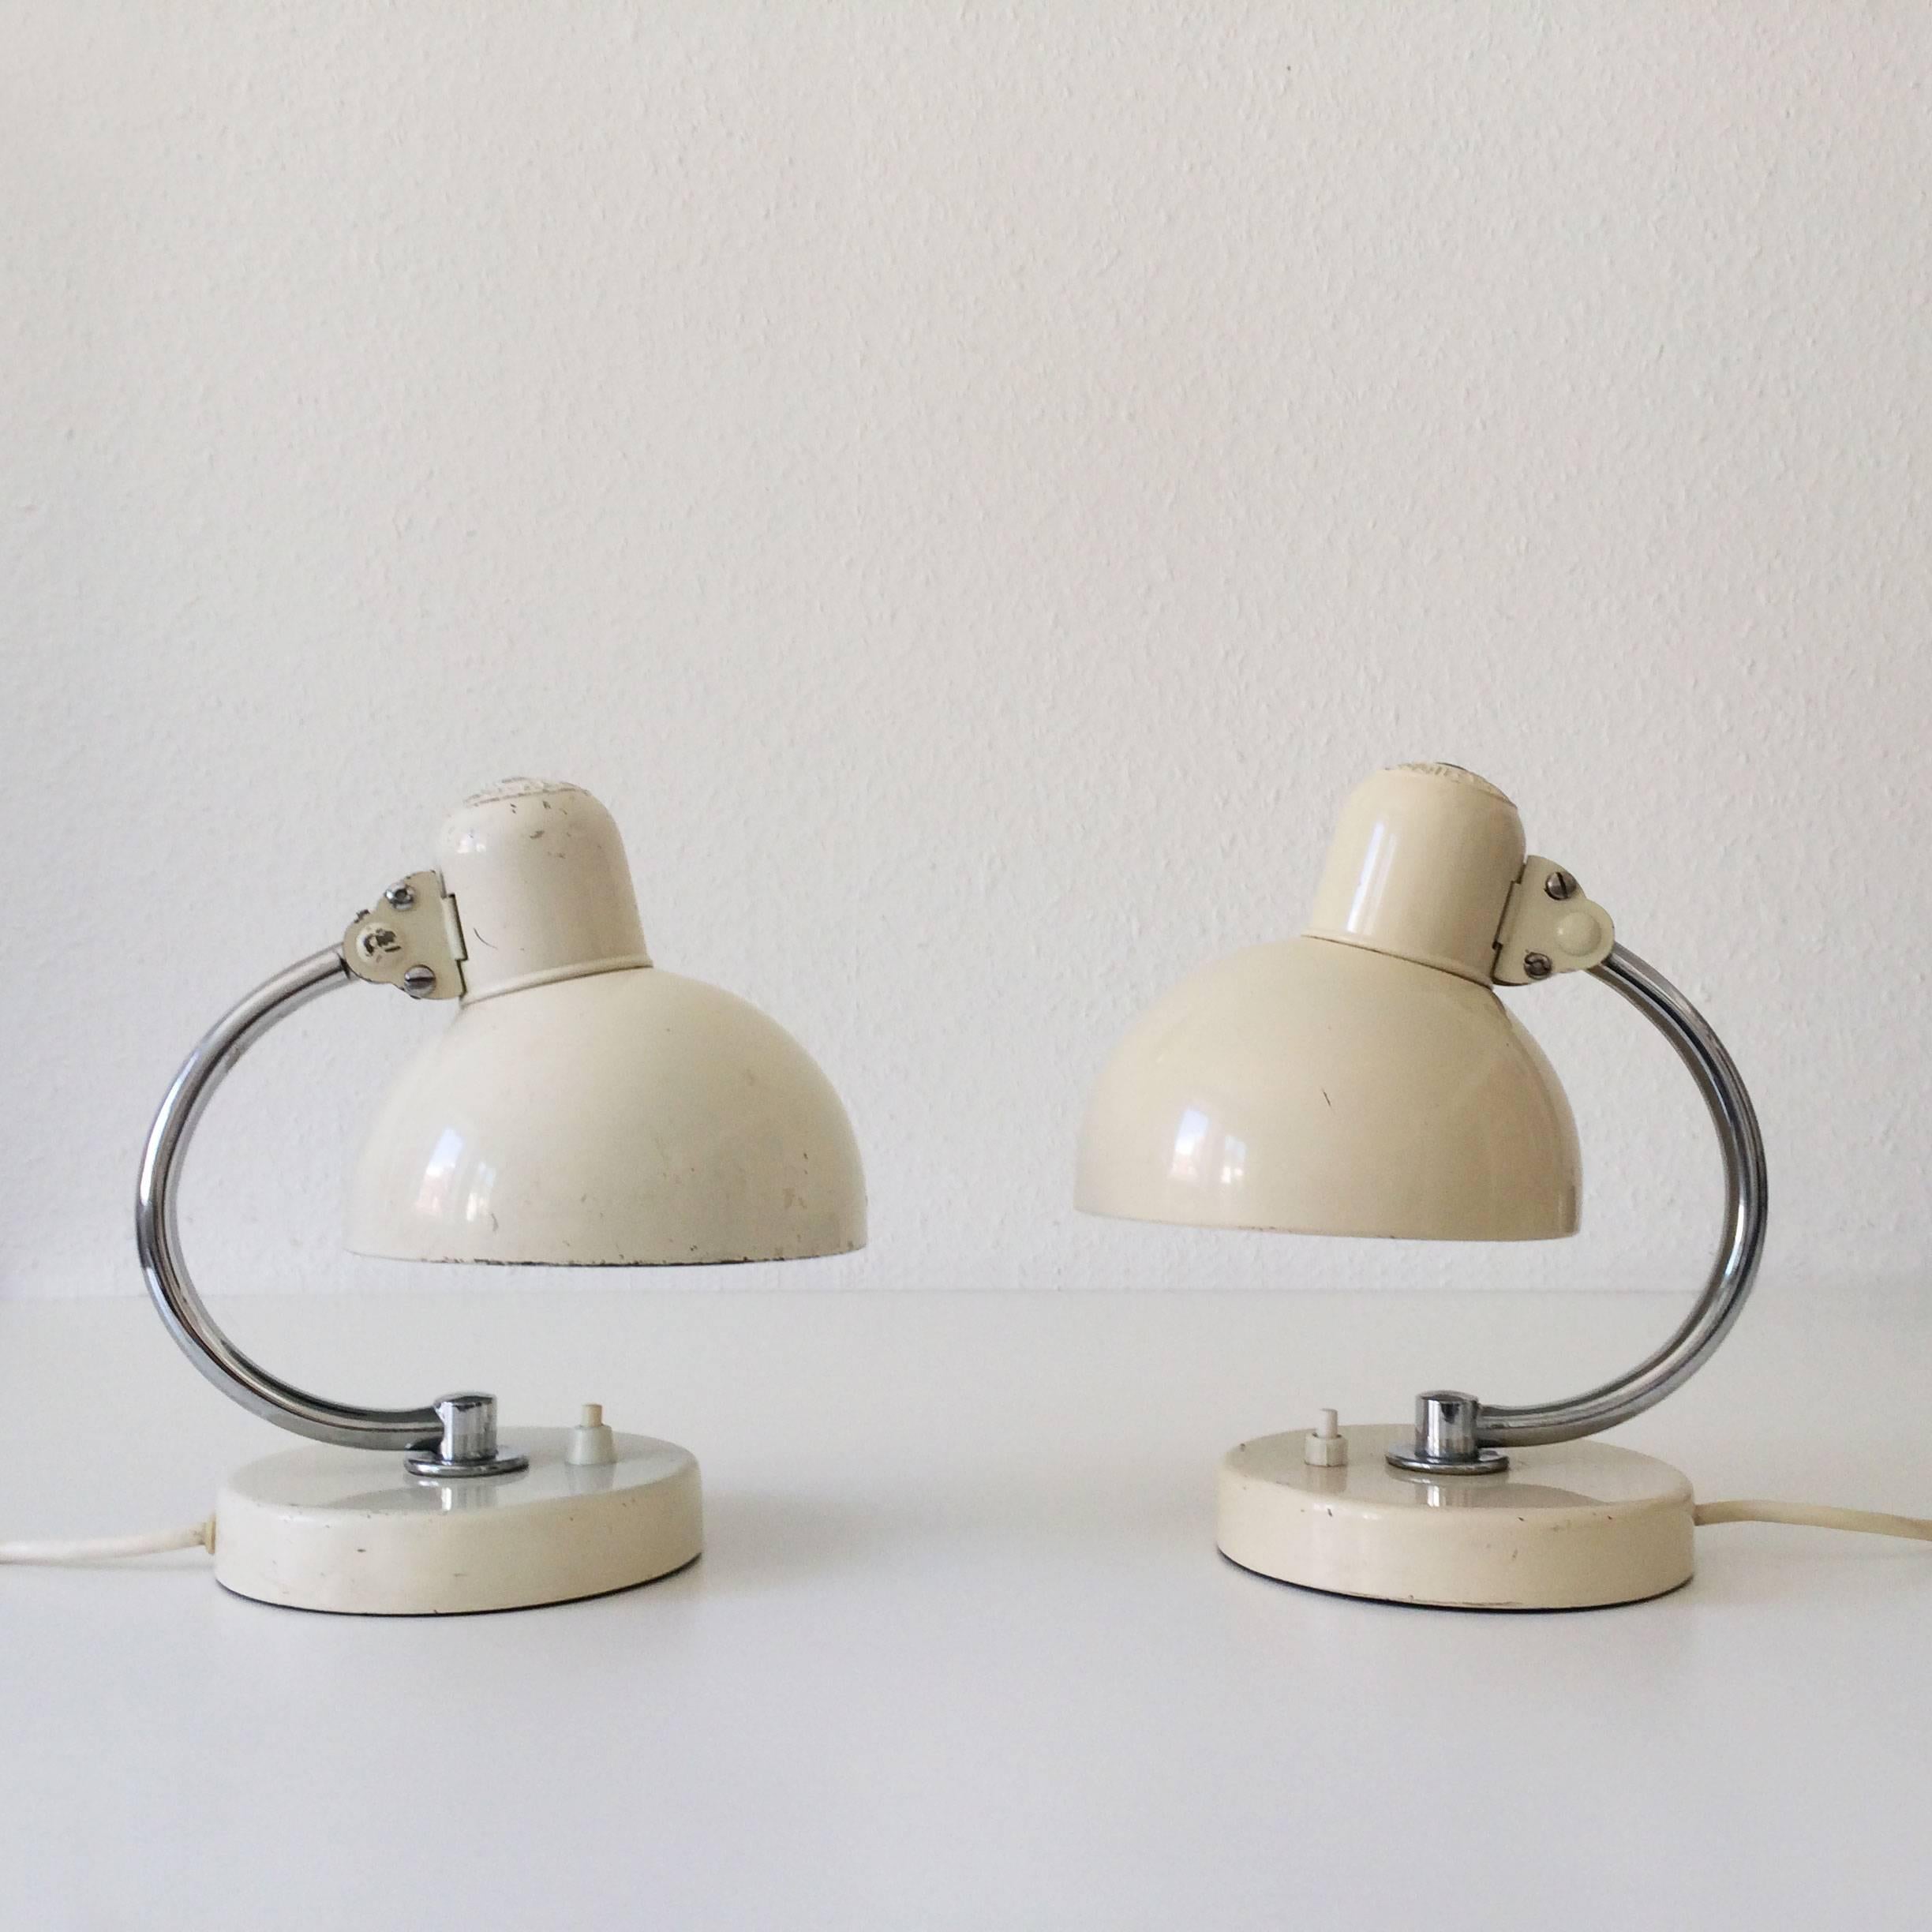 Original Bauhaus Kaiser Idell 6722 bedside table lamps, so called Baby Idell by the Bauhaus-Master Christian Dell in 1930s. Manufactured by Kaiser Leuchten, Neheim-Hüsten, Germany, 1930s. One of the lamps are in ivory, the other white lacquered.